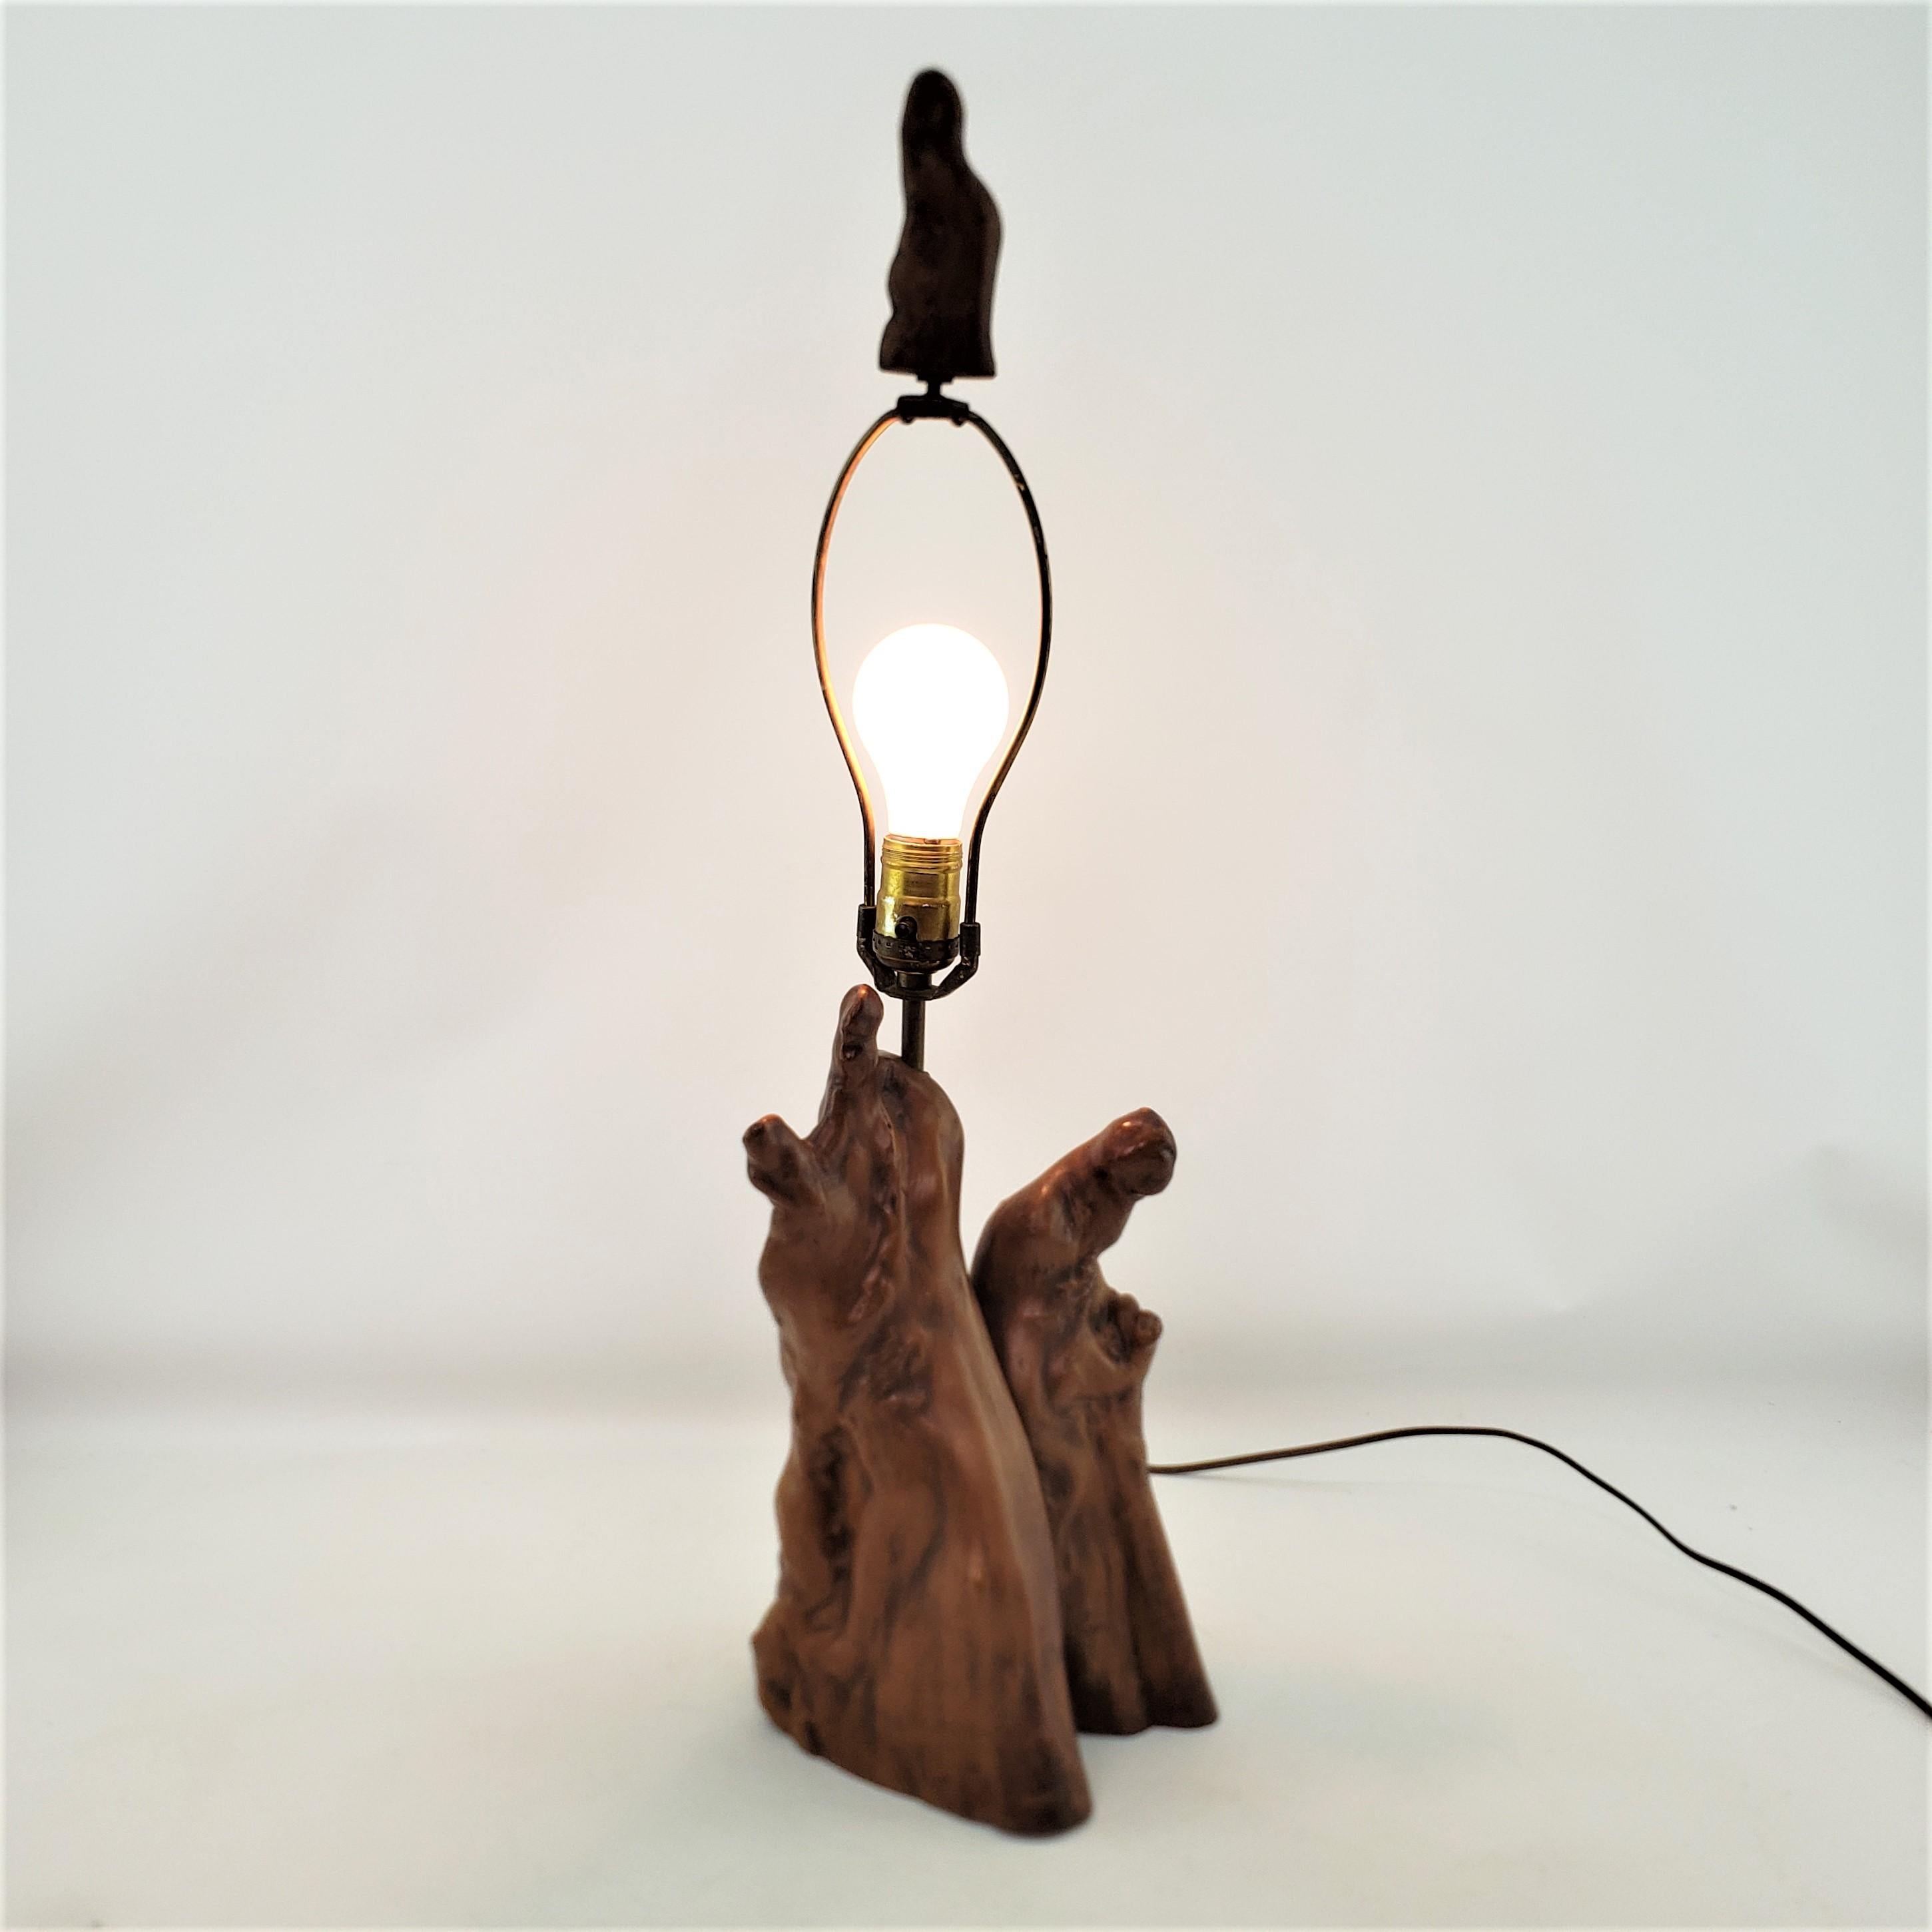 20th Century Mid-Century Era Cypress Knees Sculptural Table Lamp with Woven Wooden Shade